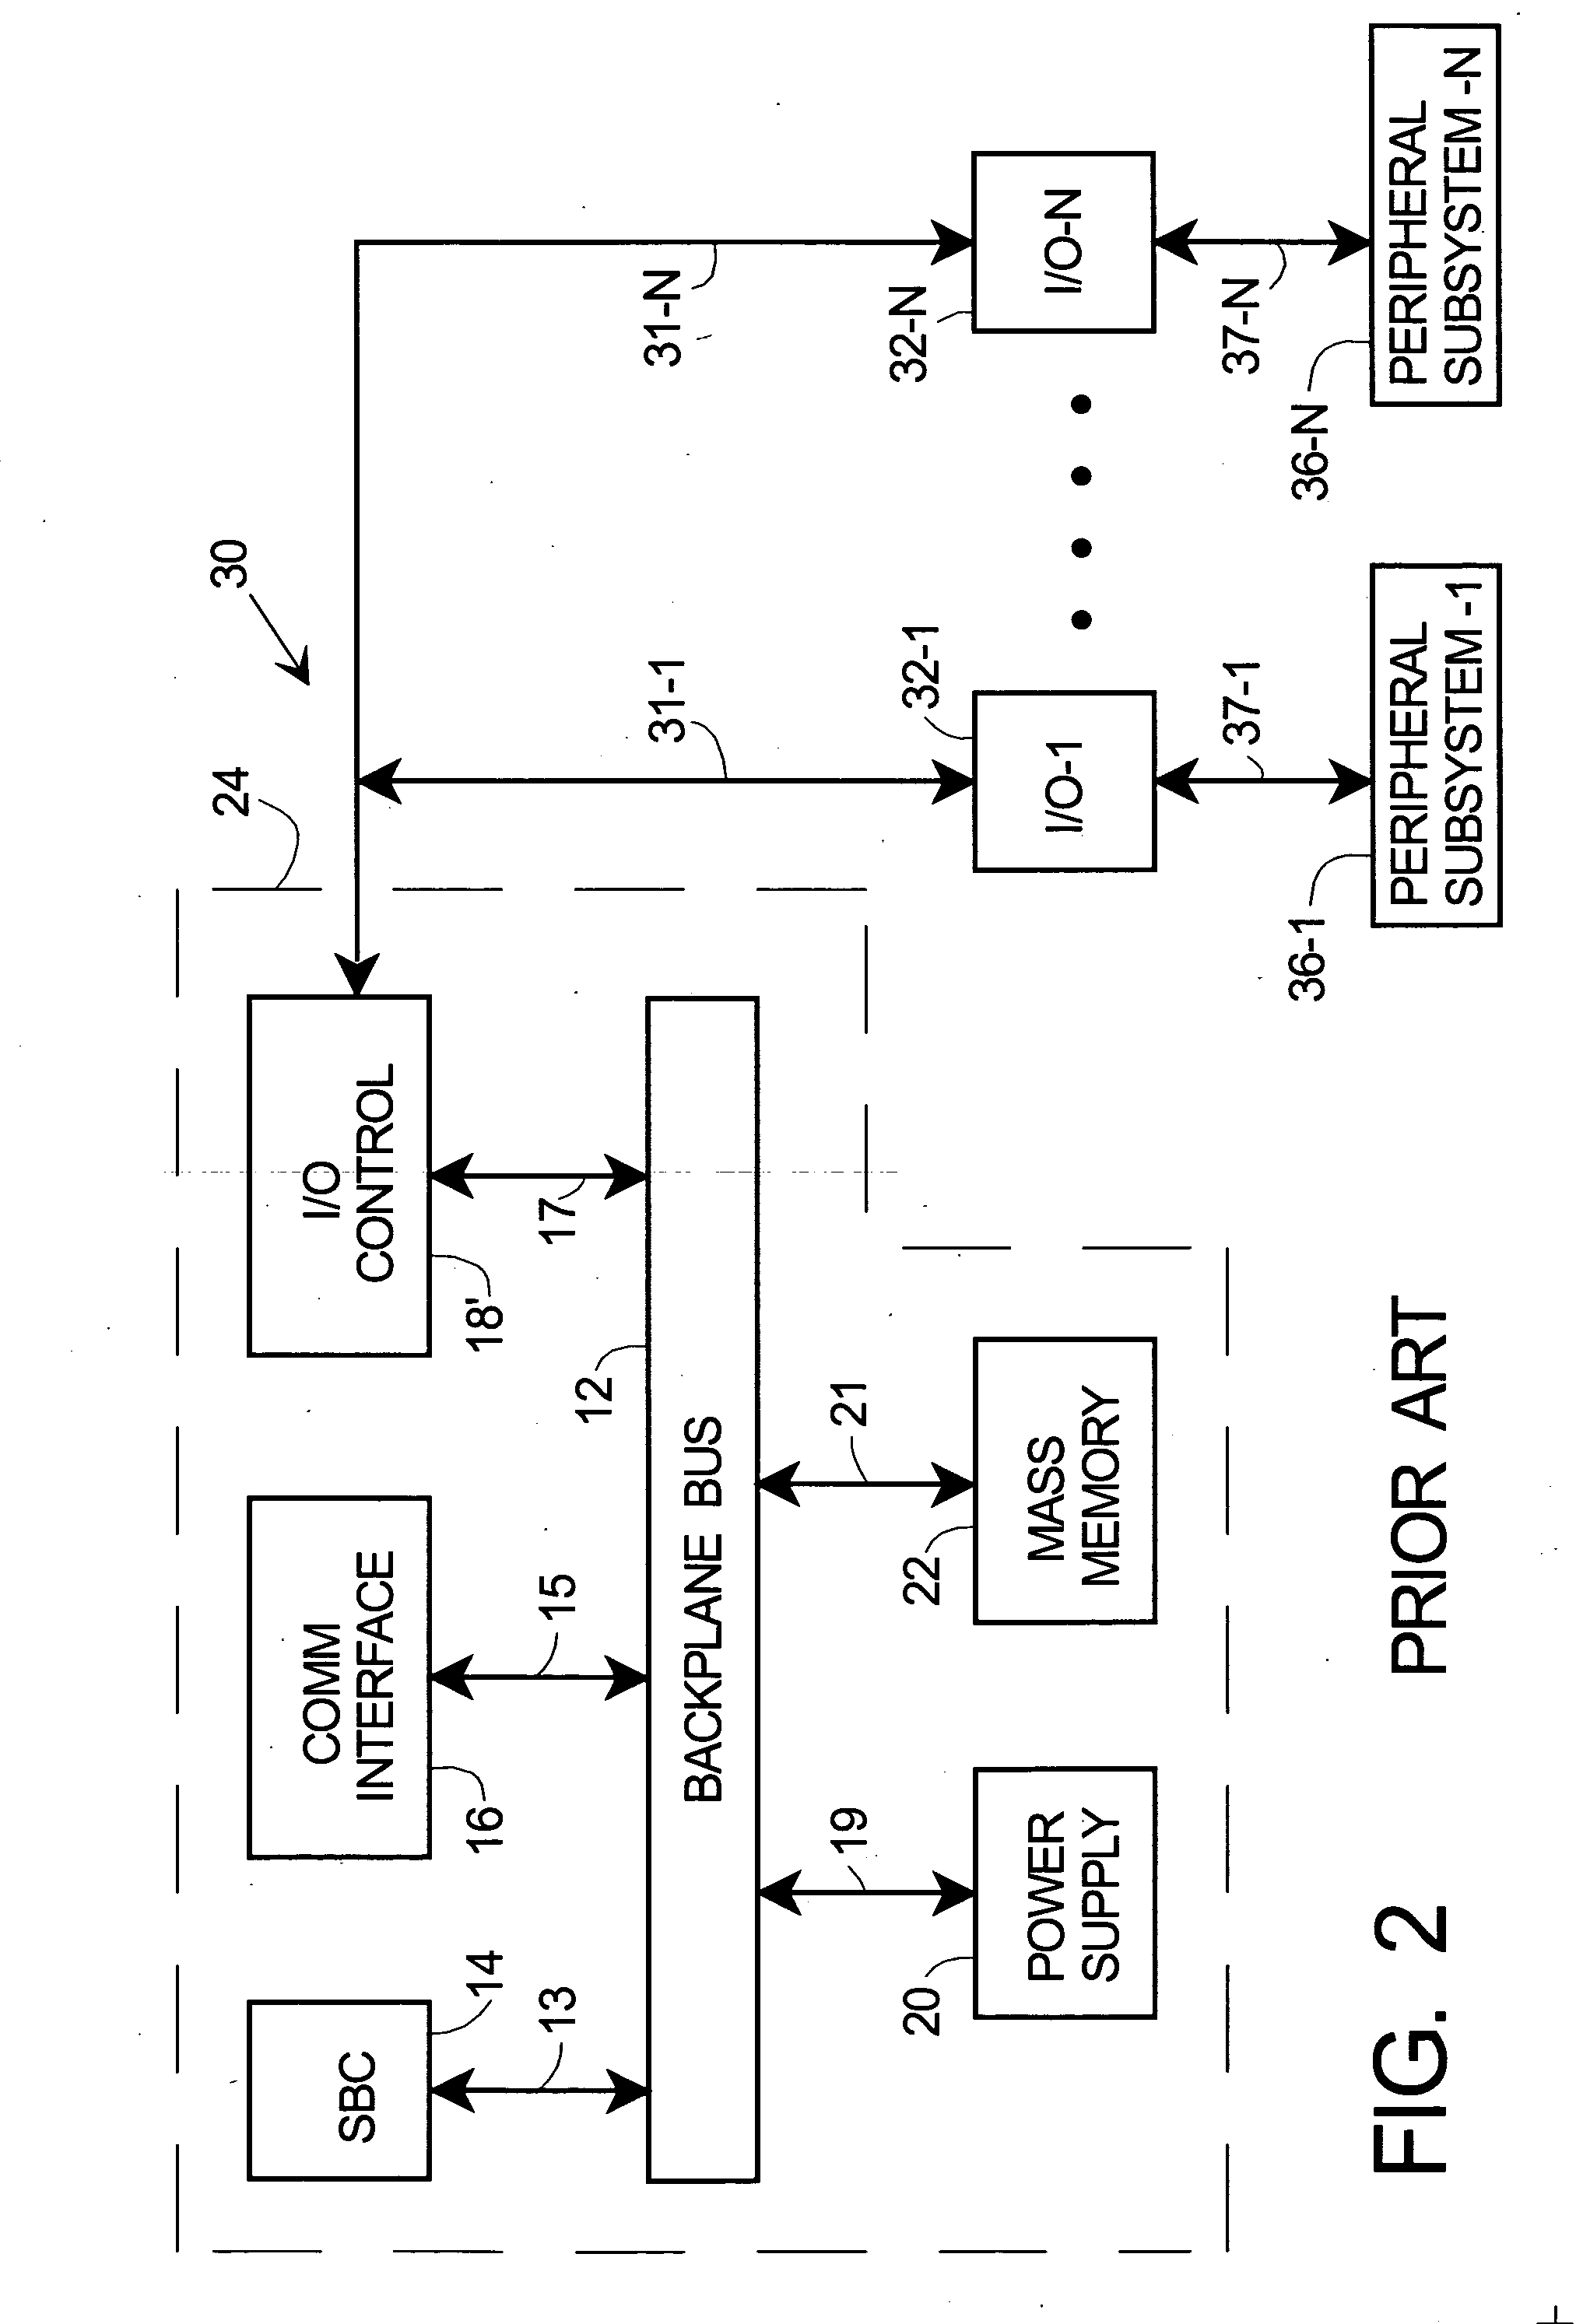 Protective bus interface and method